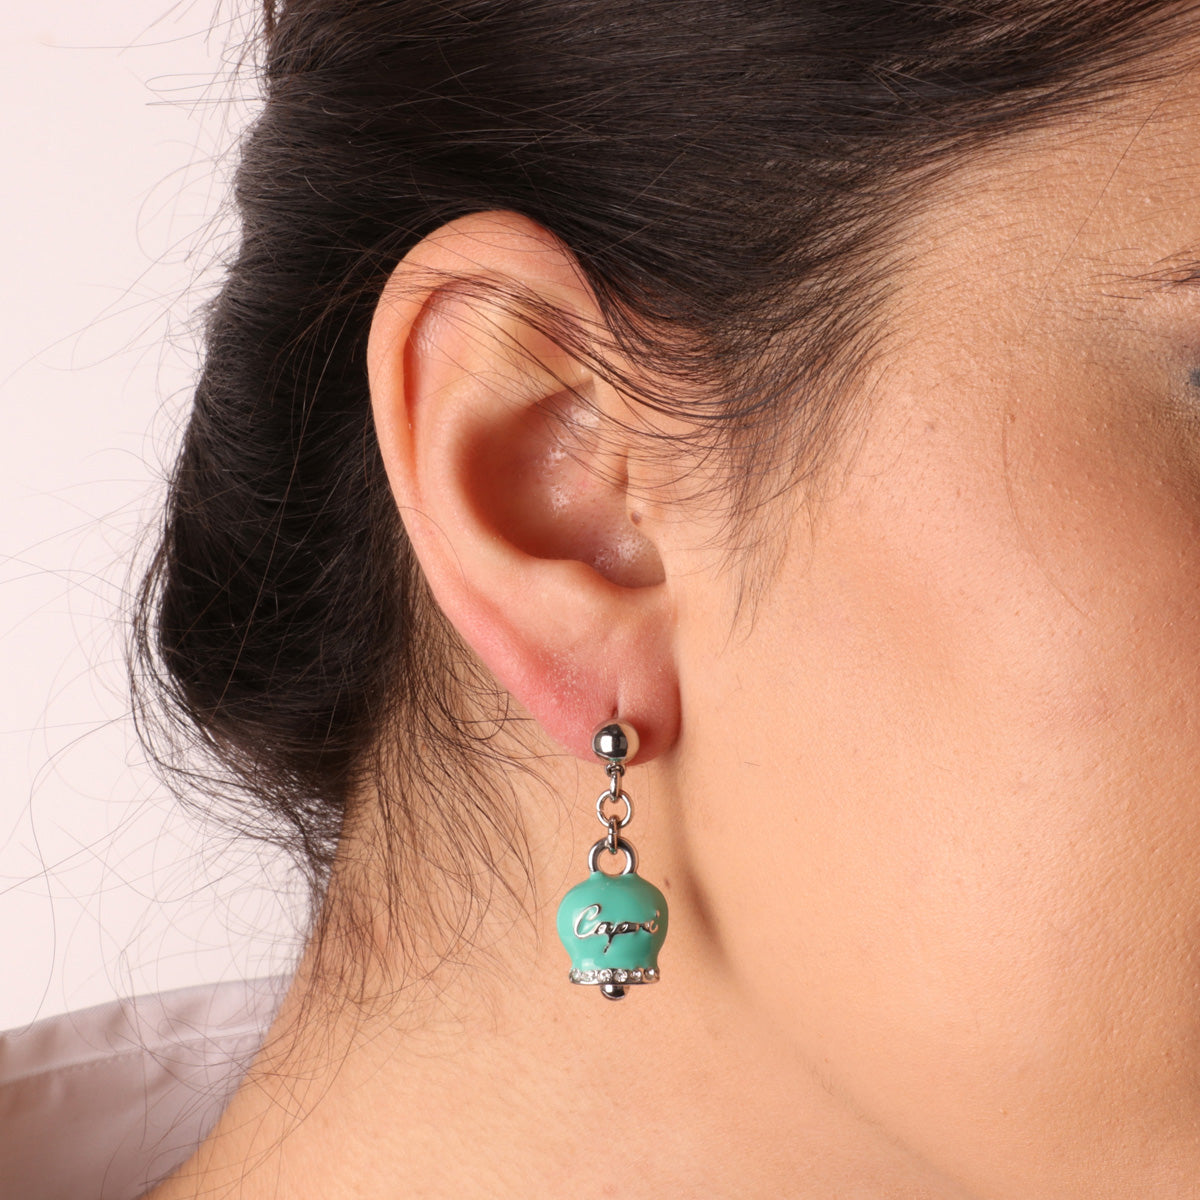 Metal earrings with bell Capri pendant in marine green enamel, embellished with crystals